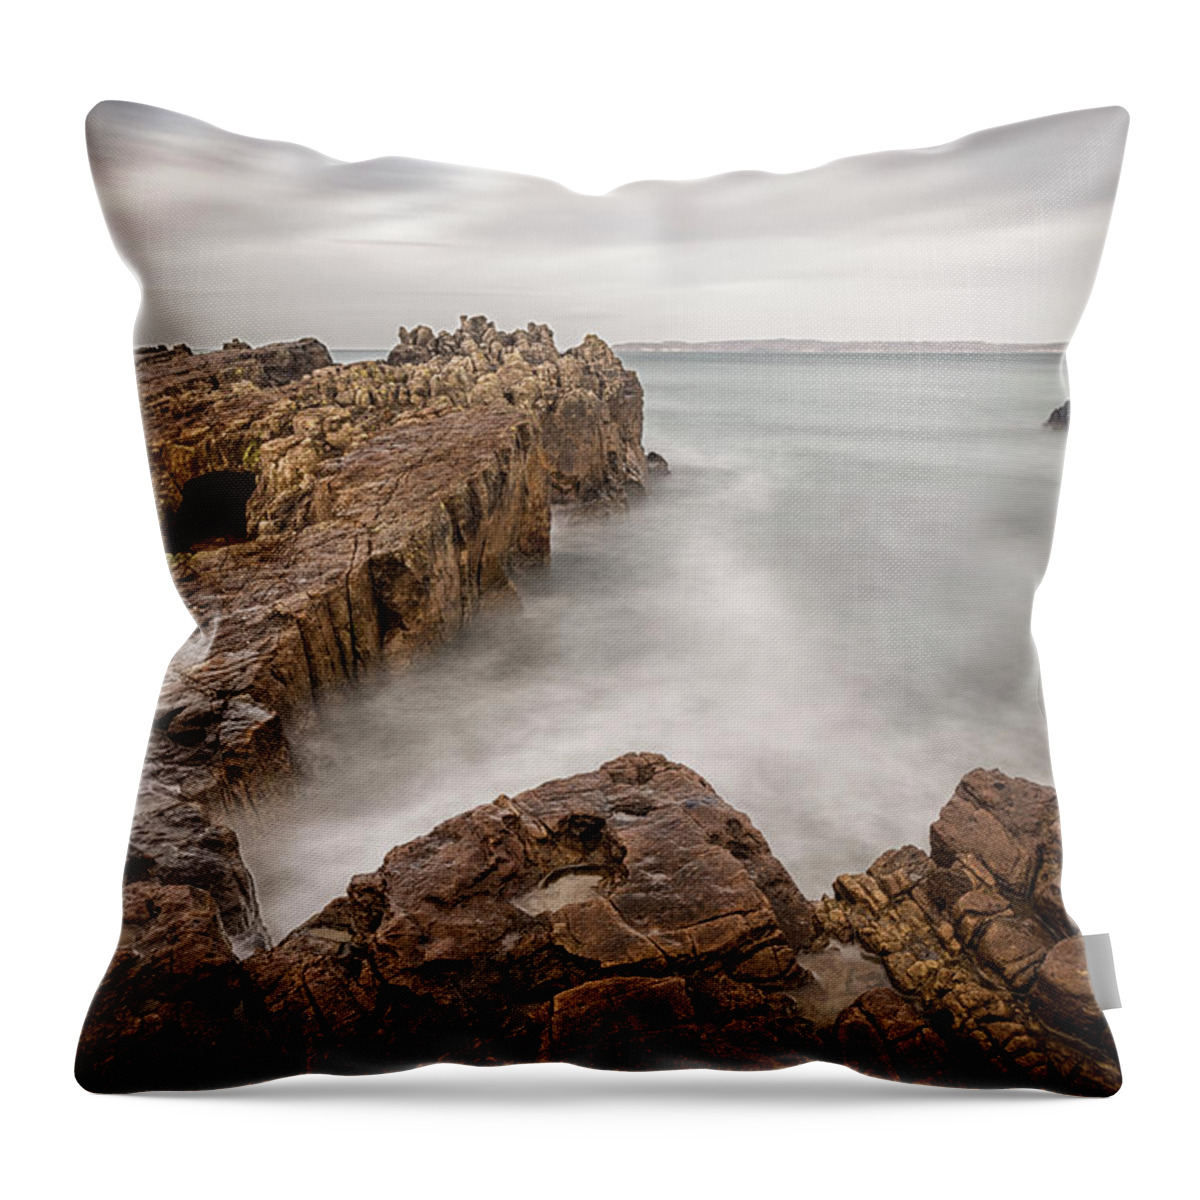 Pans Throw Pillow featuring the photograph Ballycastle - Pans Rock by Nigel R Bell